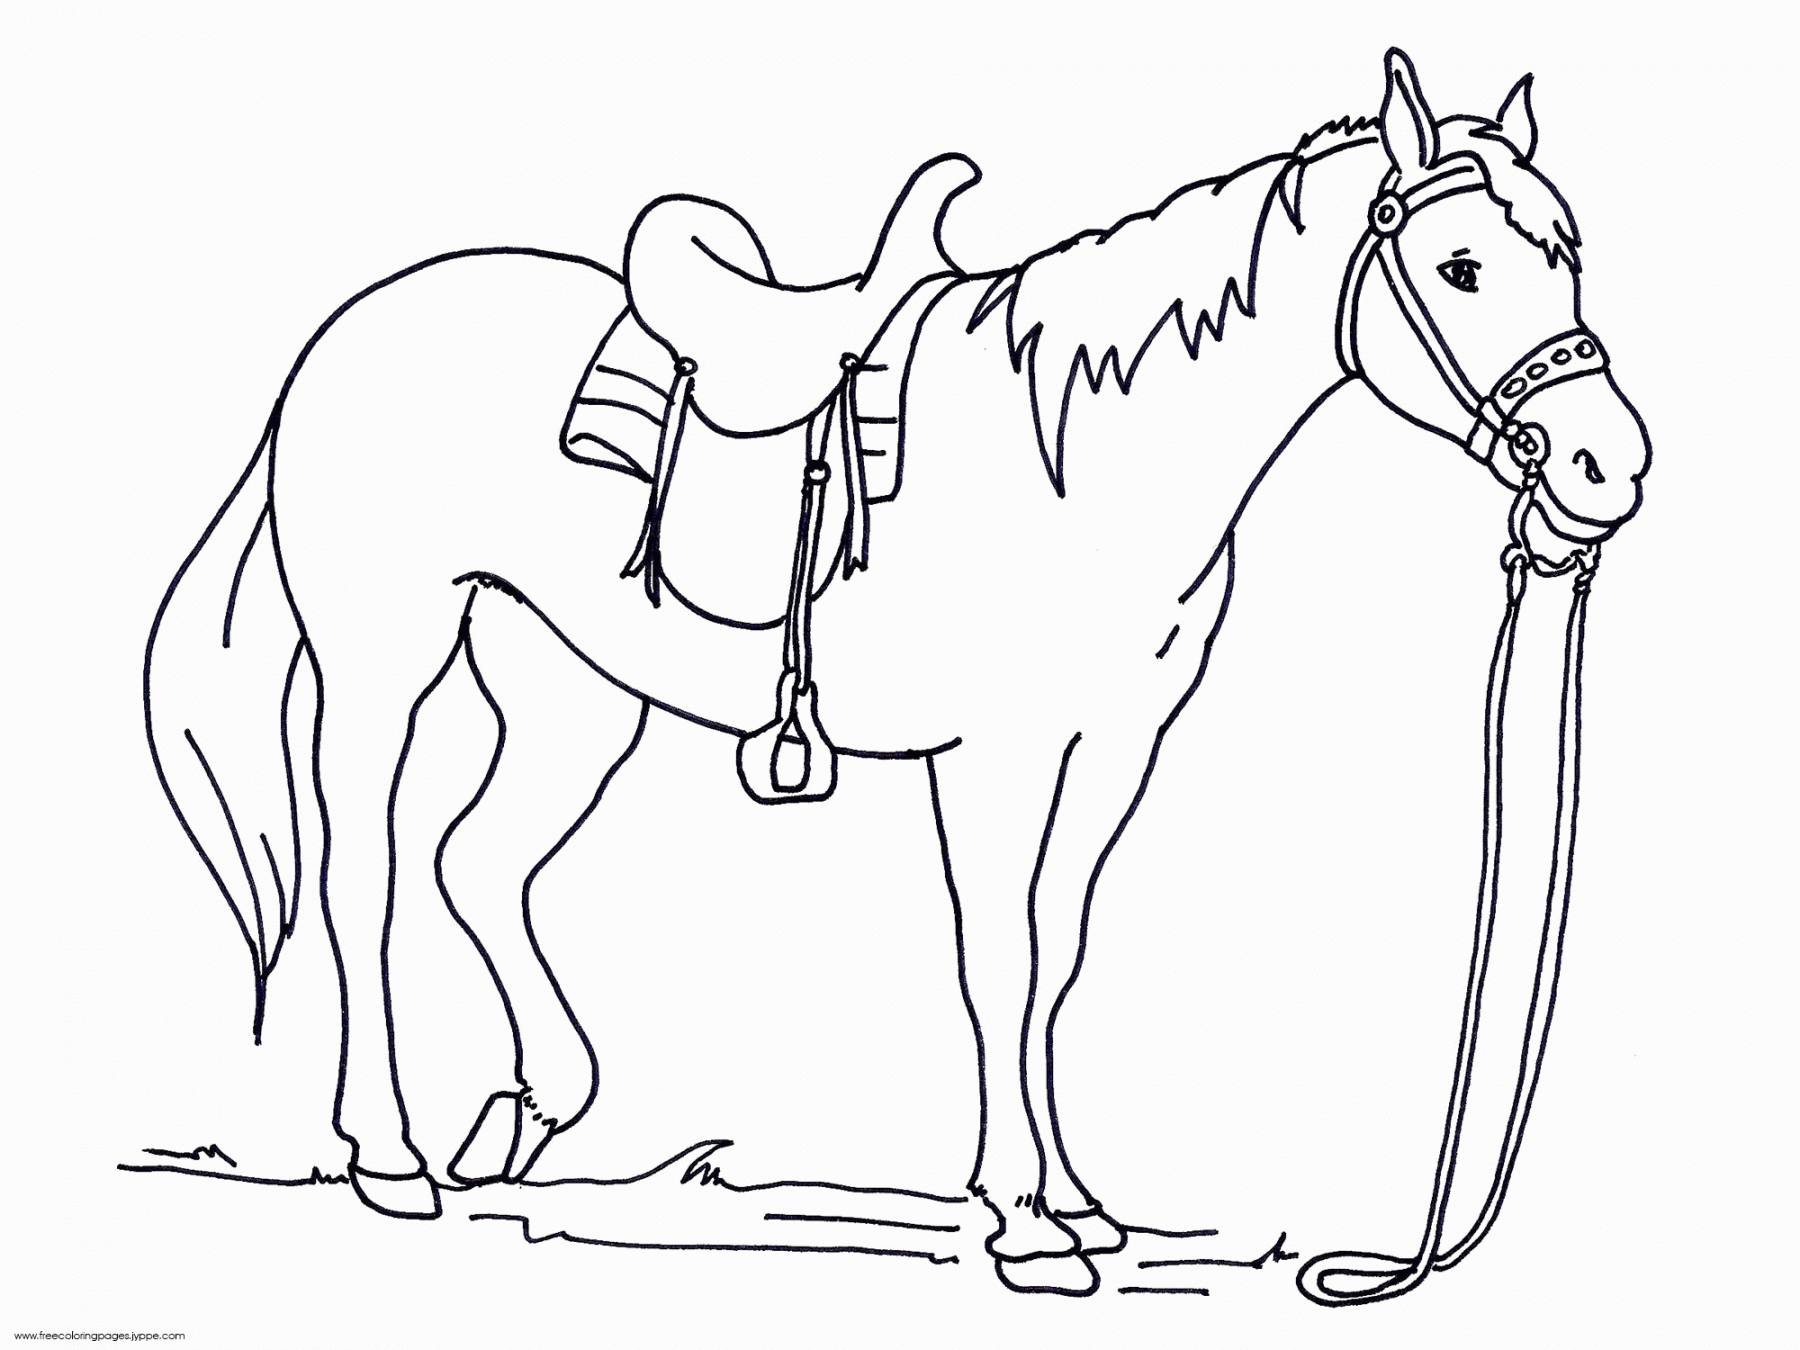 Big Printable Coloring Pages Horses - Coloring Pages For All Ages  - FREE Printables - Free Printable Horse Coloring Pages